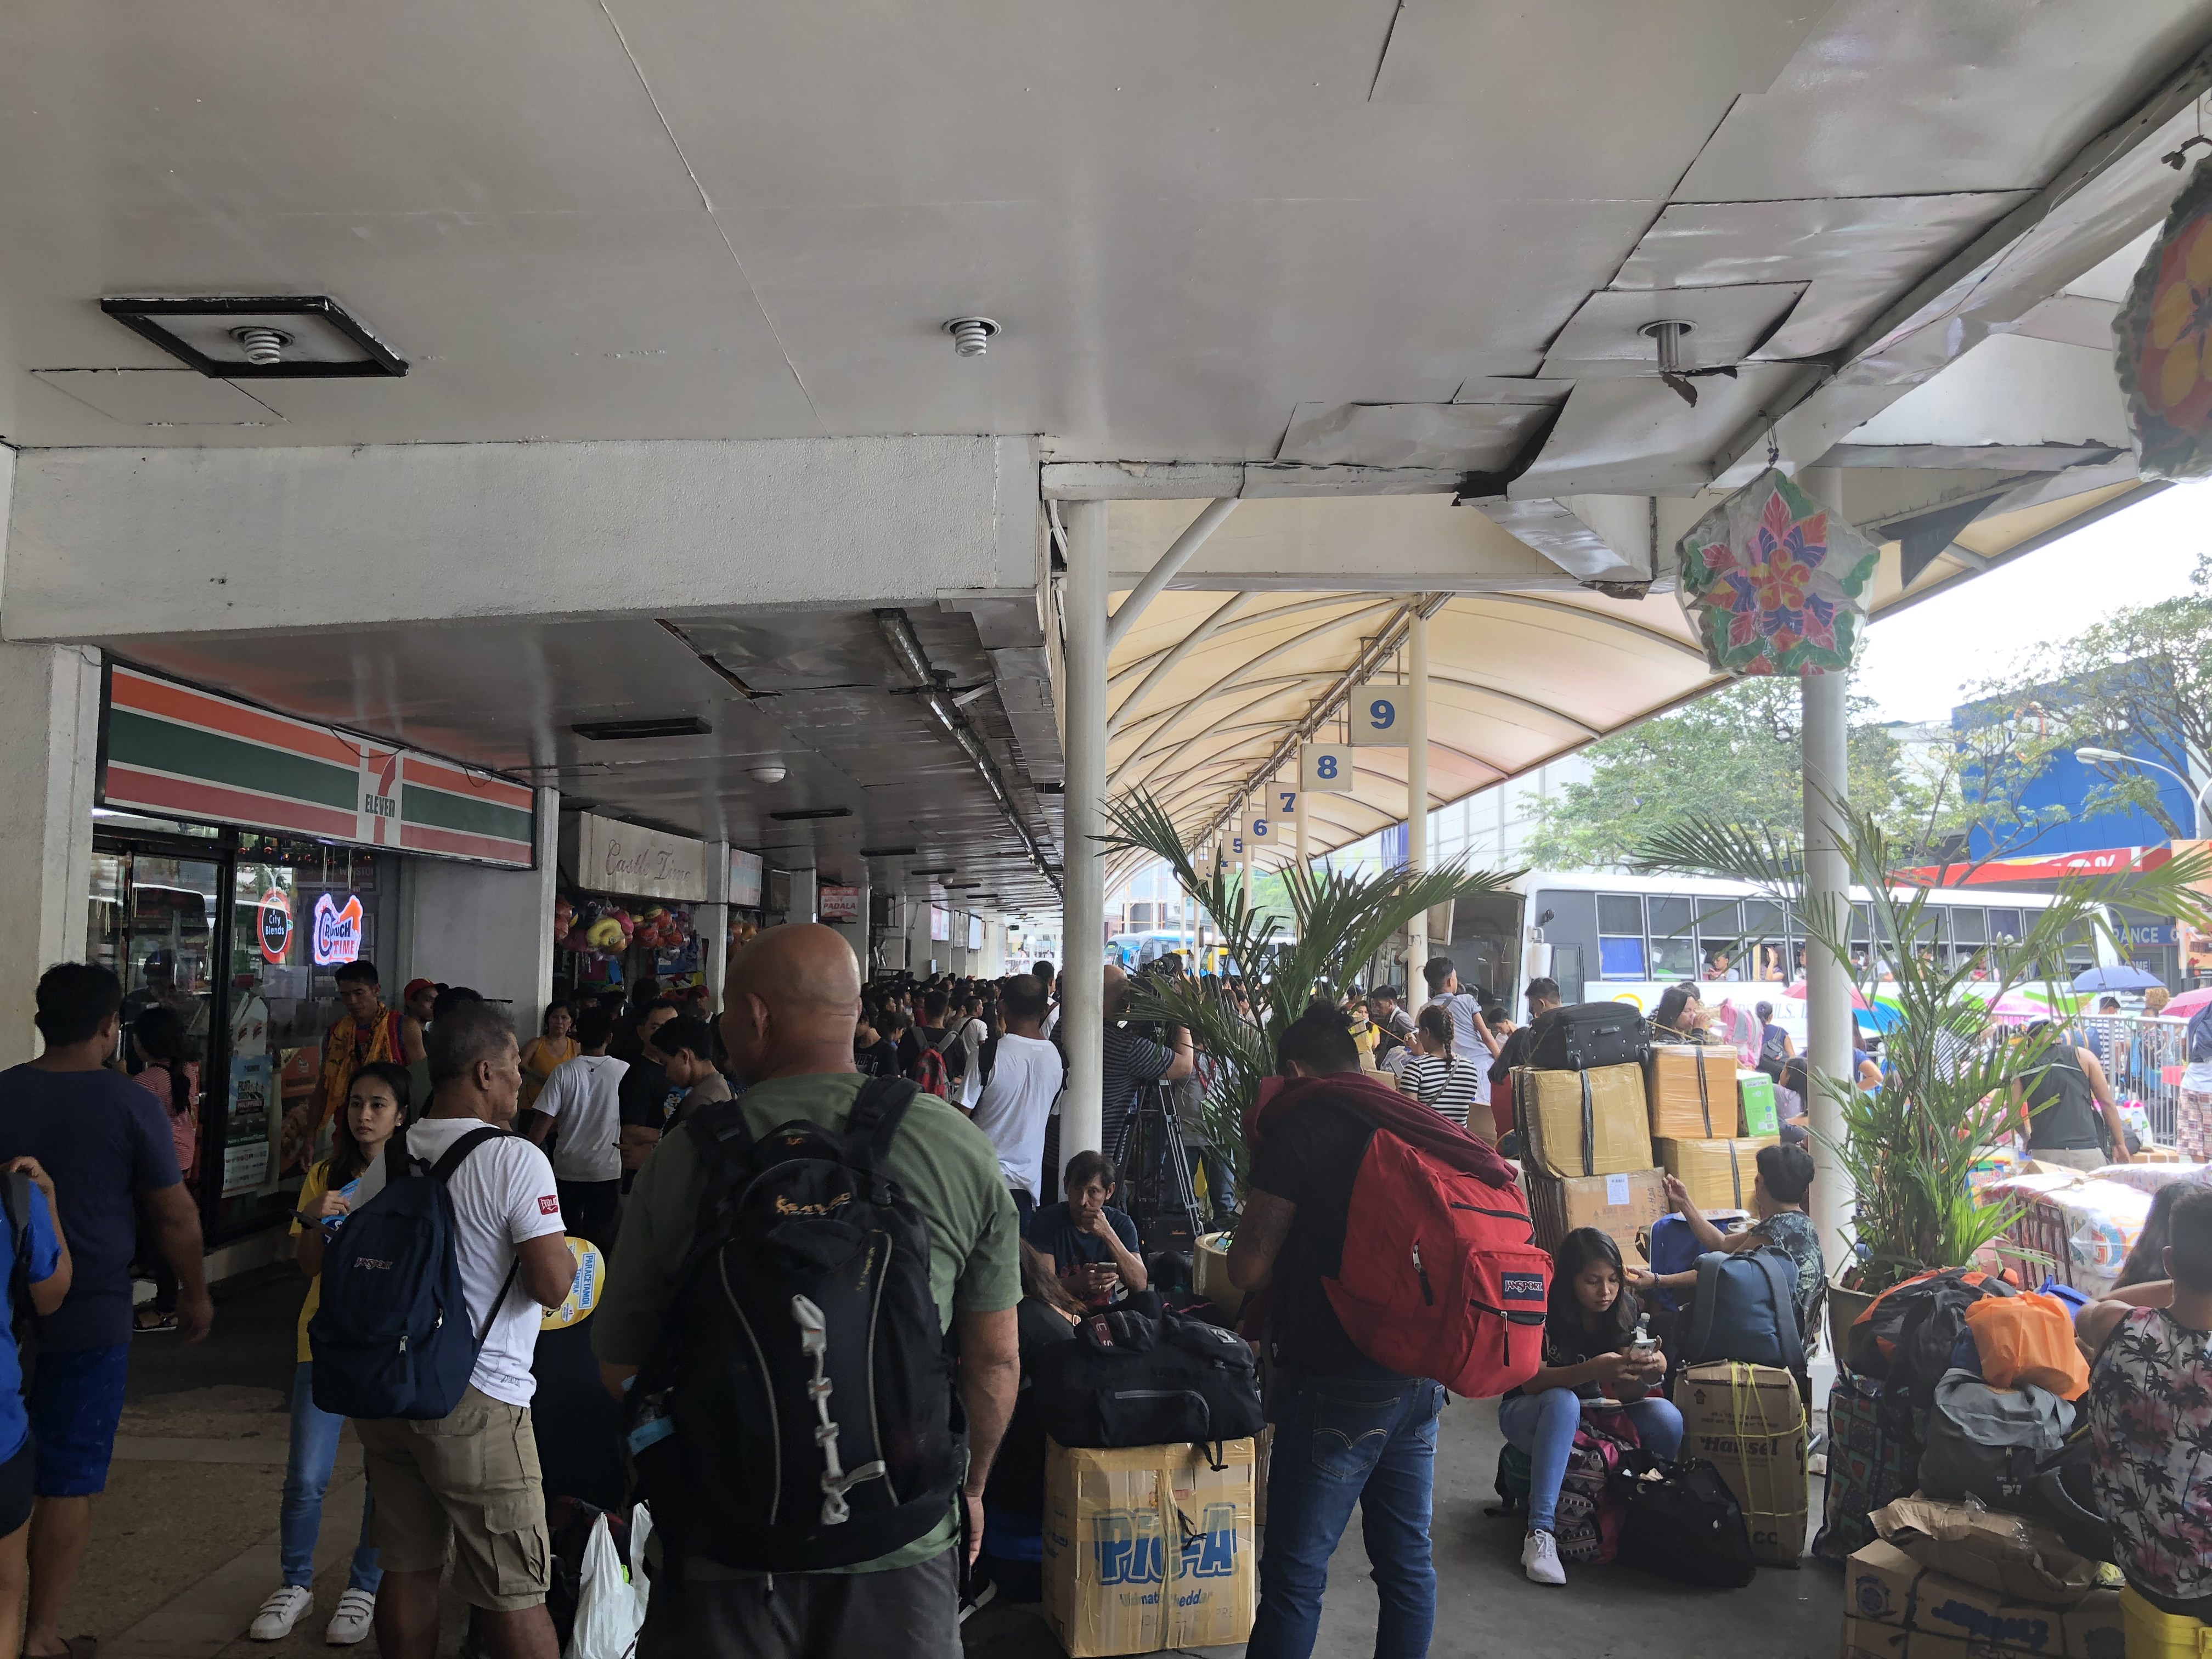 hristmas season travellers flock to the Araneta bus terminal in Cubao, Quezon City on Saturday to book trips to the provinces ahead of Christmas Day.